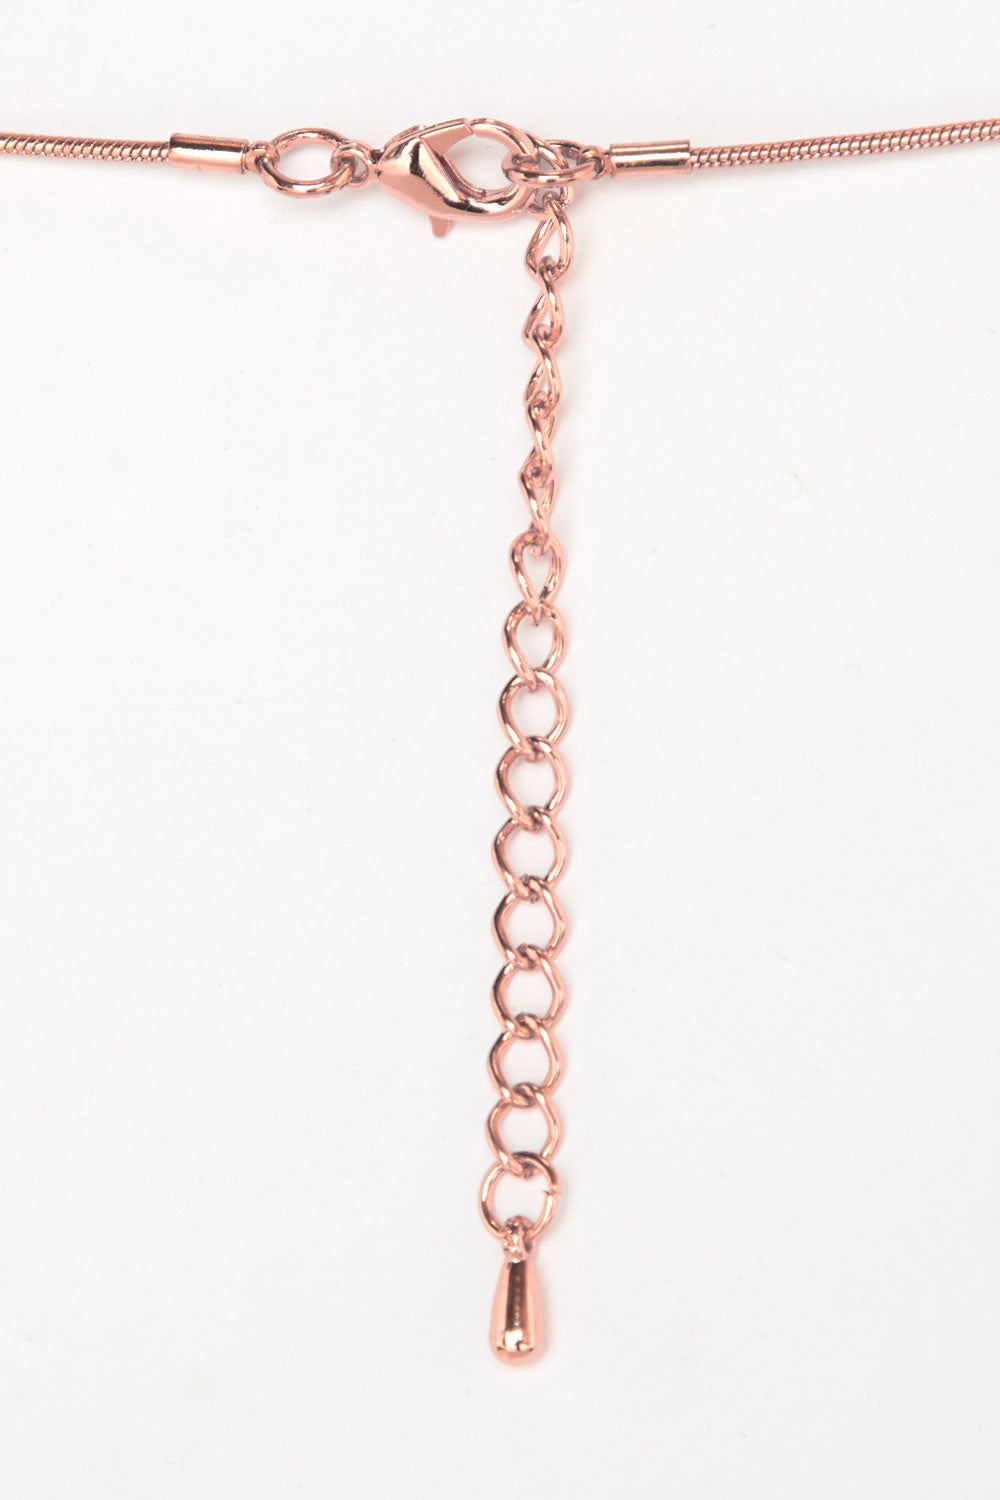 Dragonfly Necklace - Rose Gold